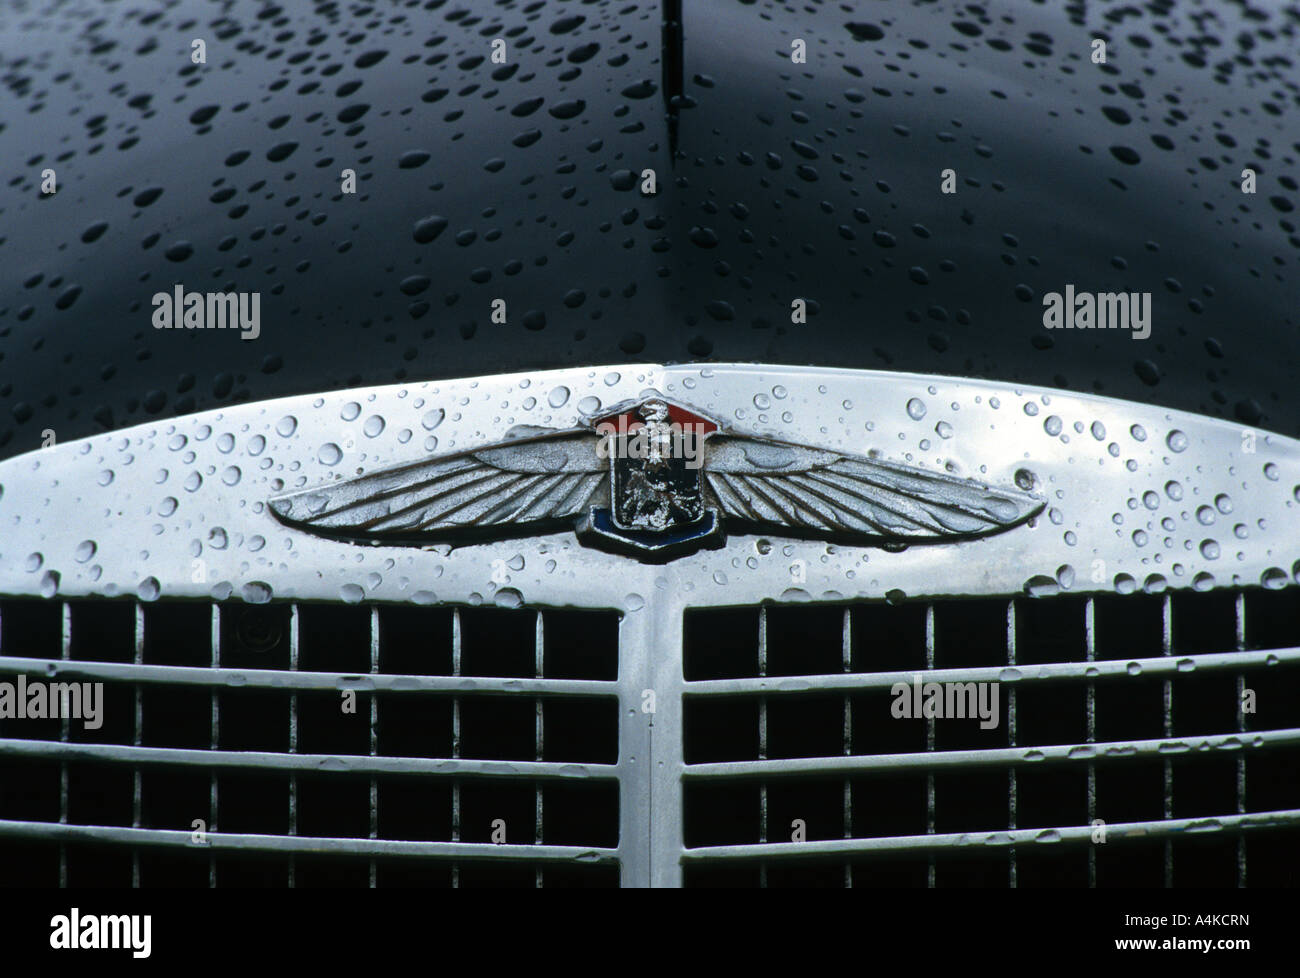 La Salle (Cadillac) of 1937. American car manufacturer 1927 to 1940 Stock Photo